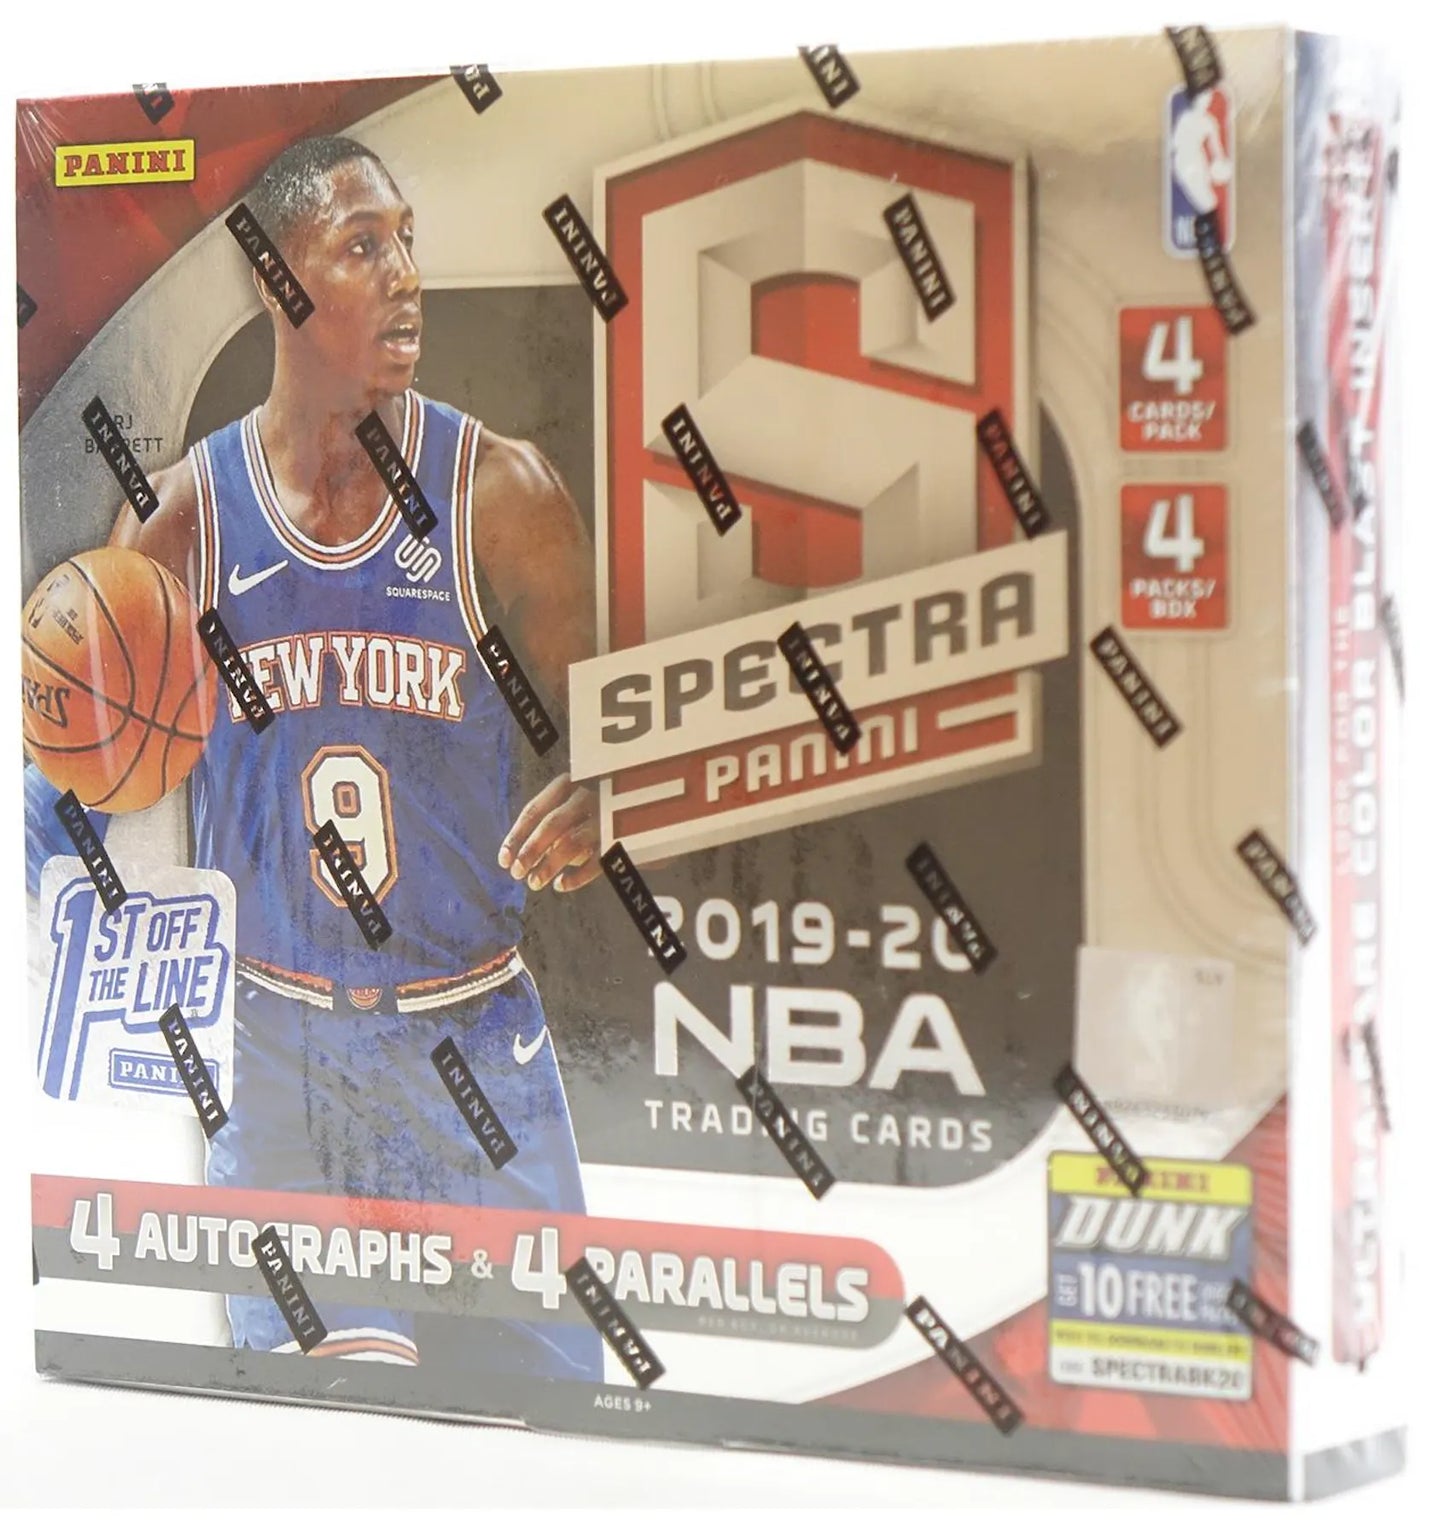 2019/20 Panini Spectra Basketball 1st Off The Line Hobby Box